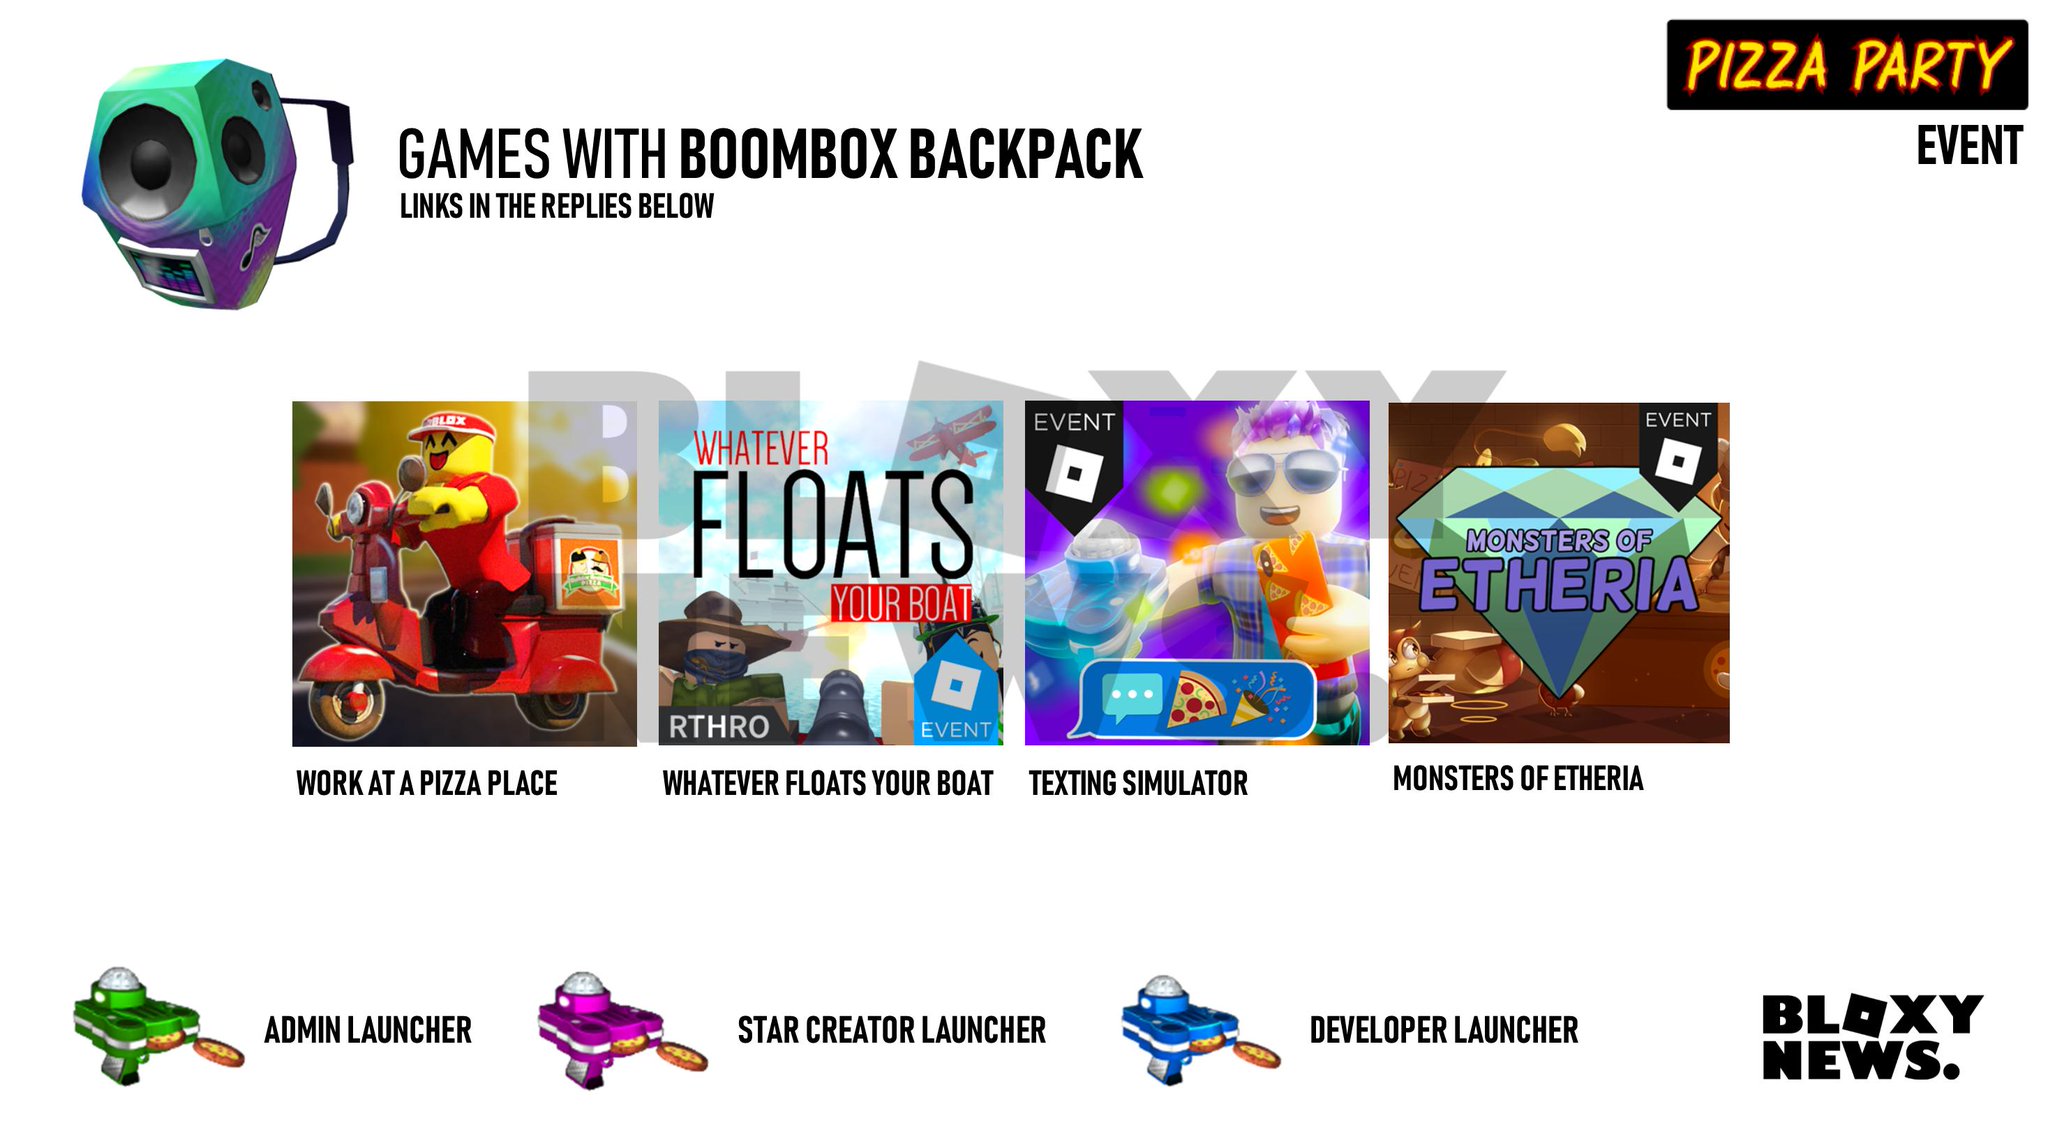 Bloxy News On Twitter To Get The Boombox Backpack Join Any Of